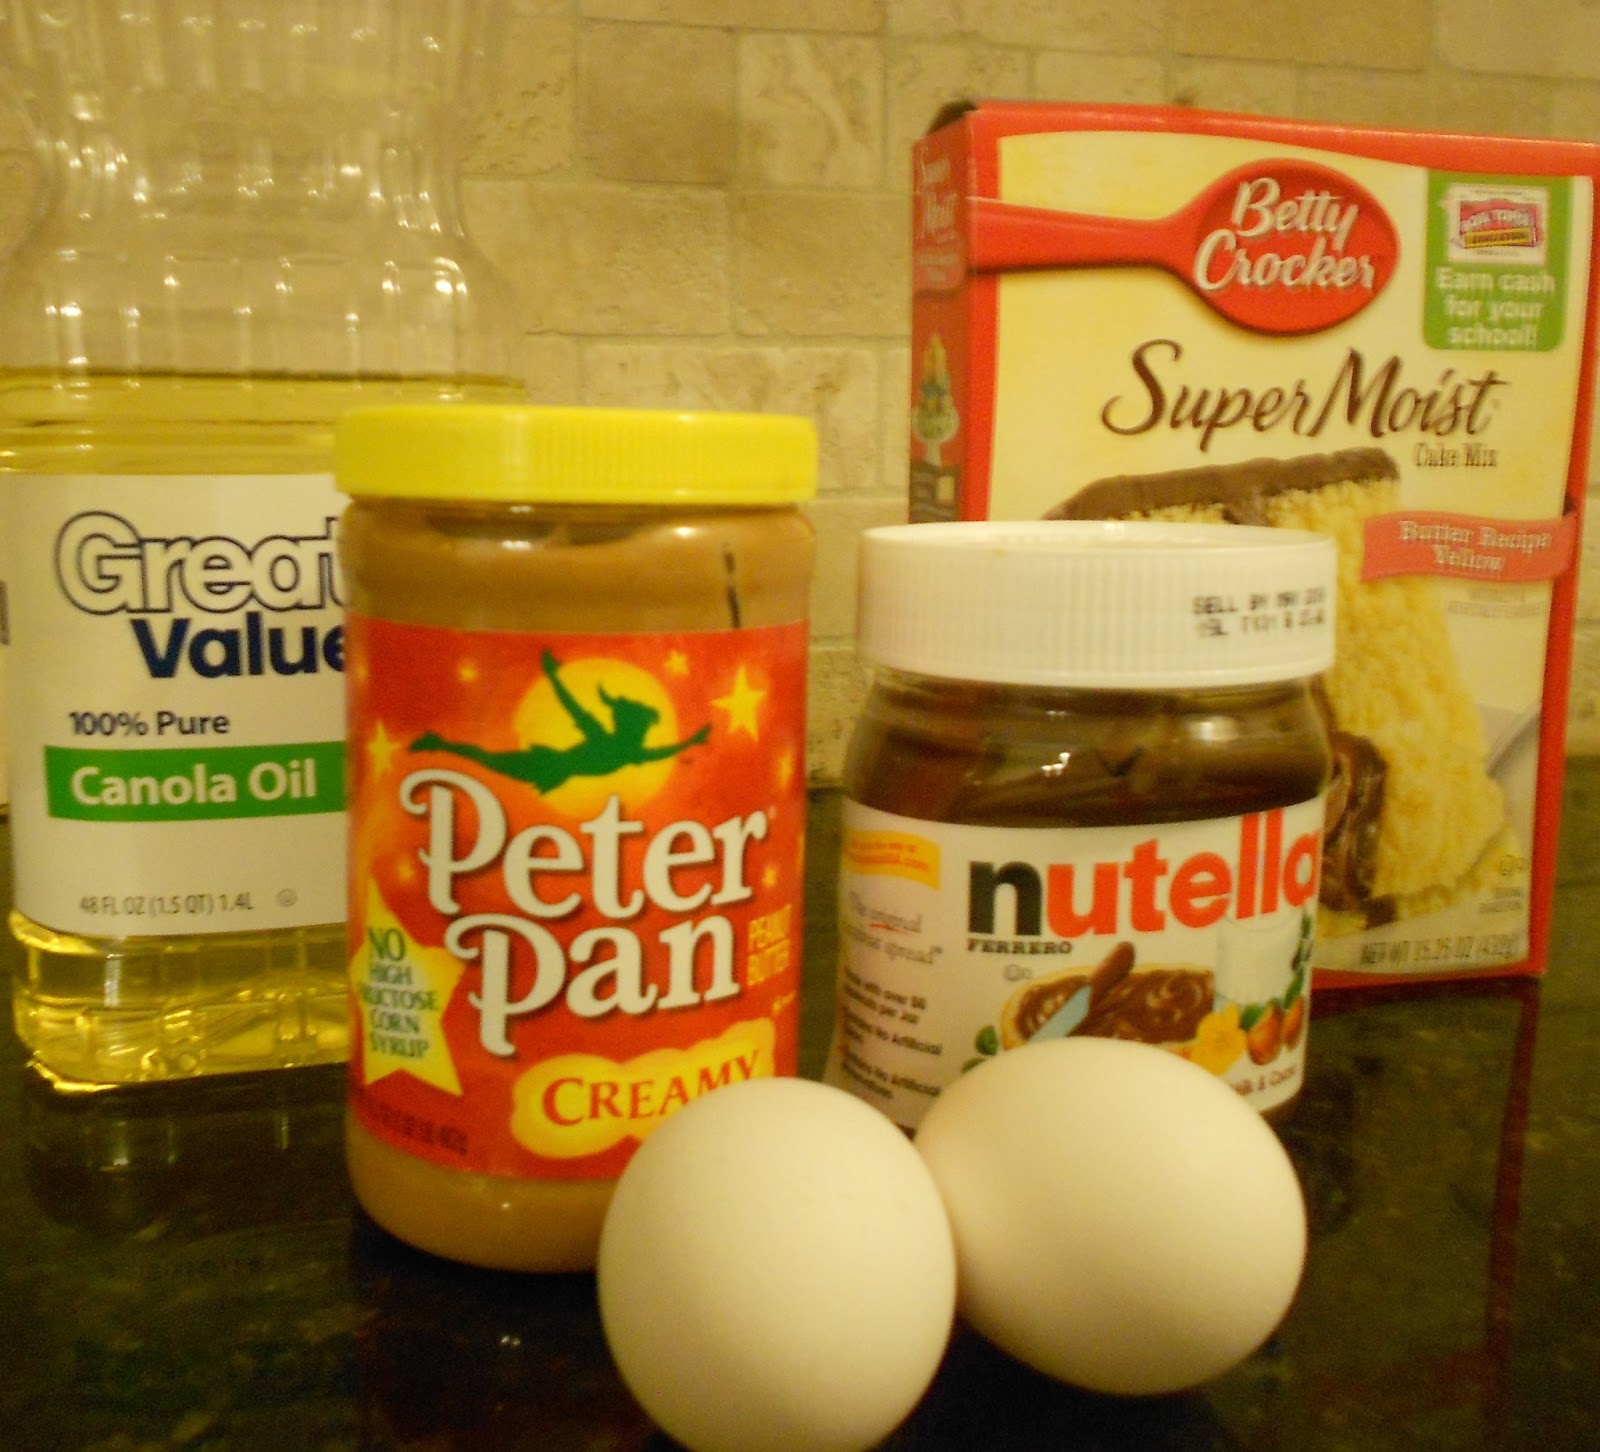 Moonlight Nutella The cake Mix Factory: butter make from PB Cookies how to peanut mix cookies Cake